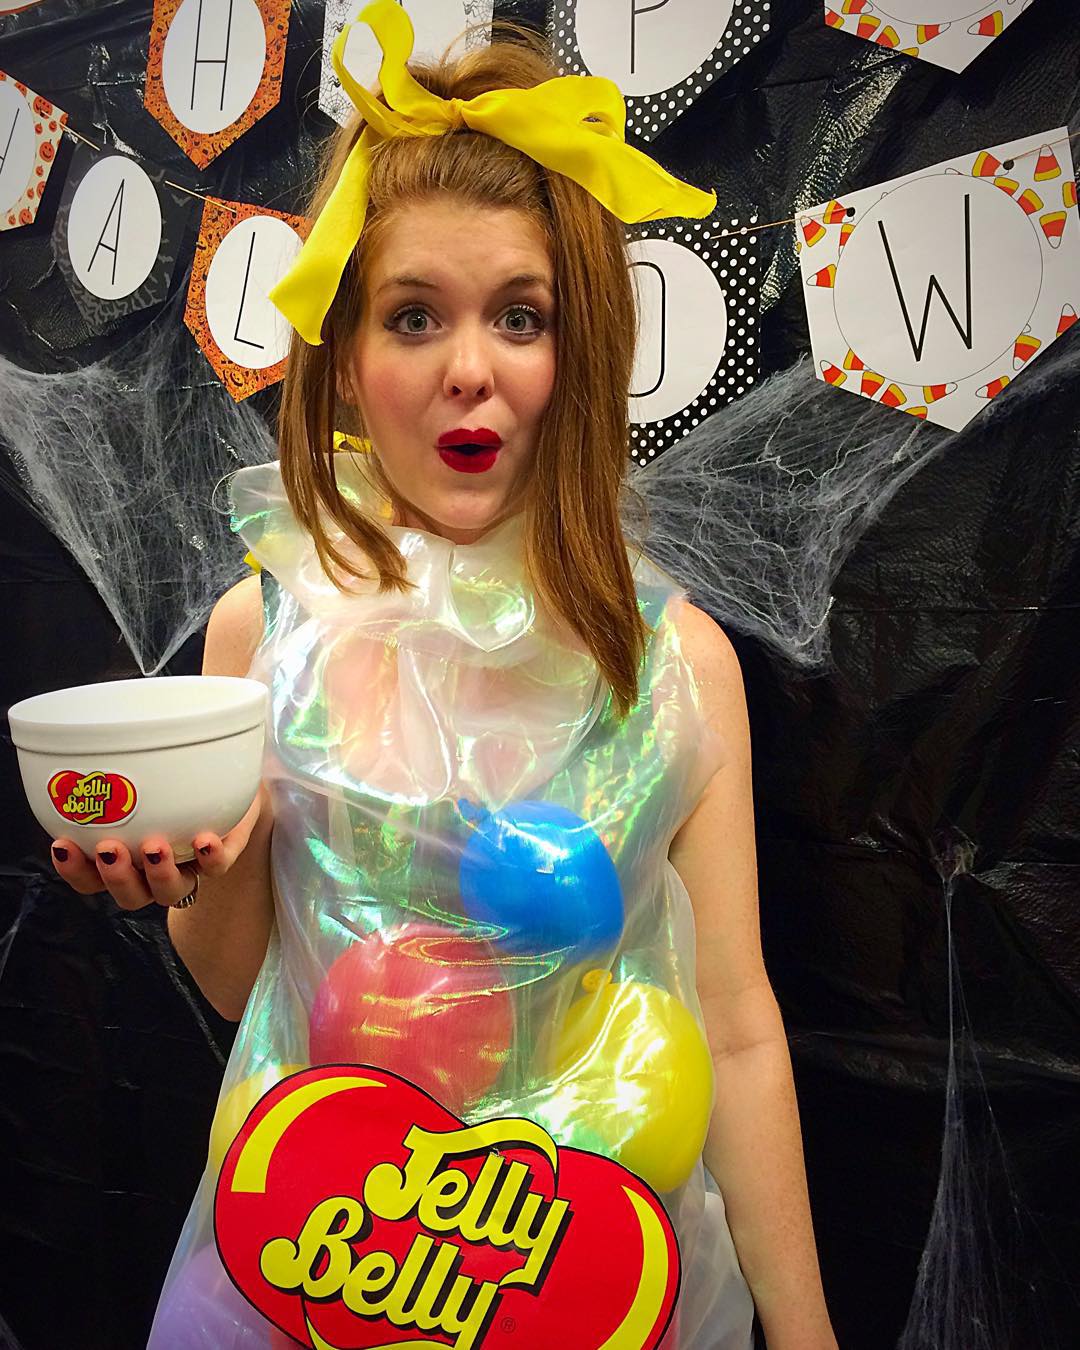 bag of jelly beans, jelly belly costume, wildfox,  easy halloween costumes, diy halloween costumes, halloween costume ideas